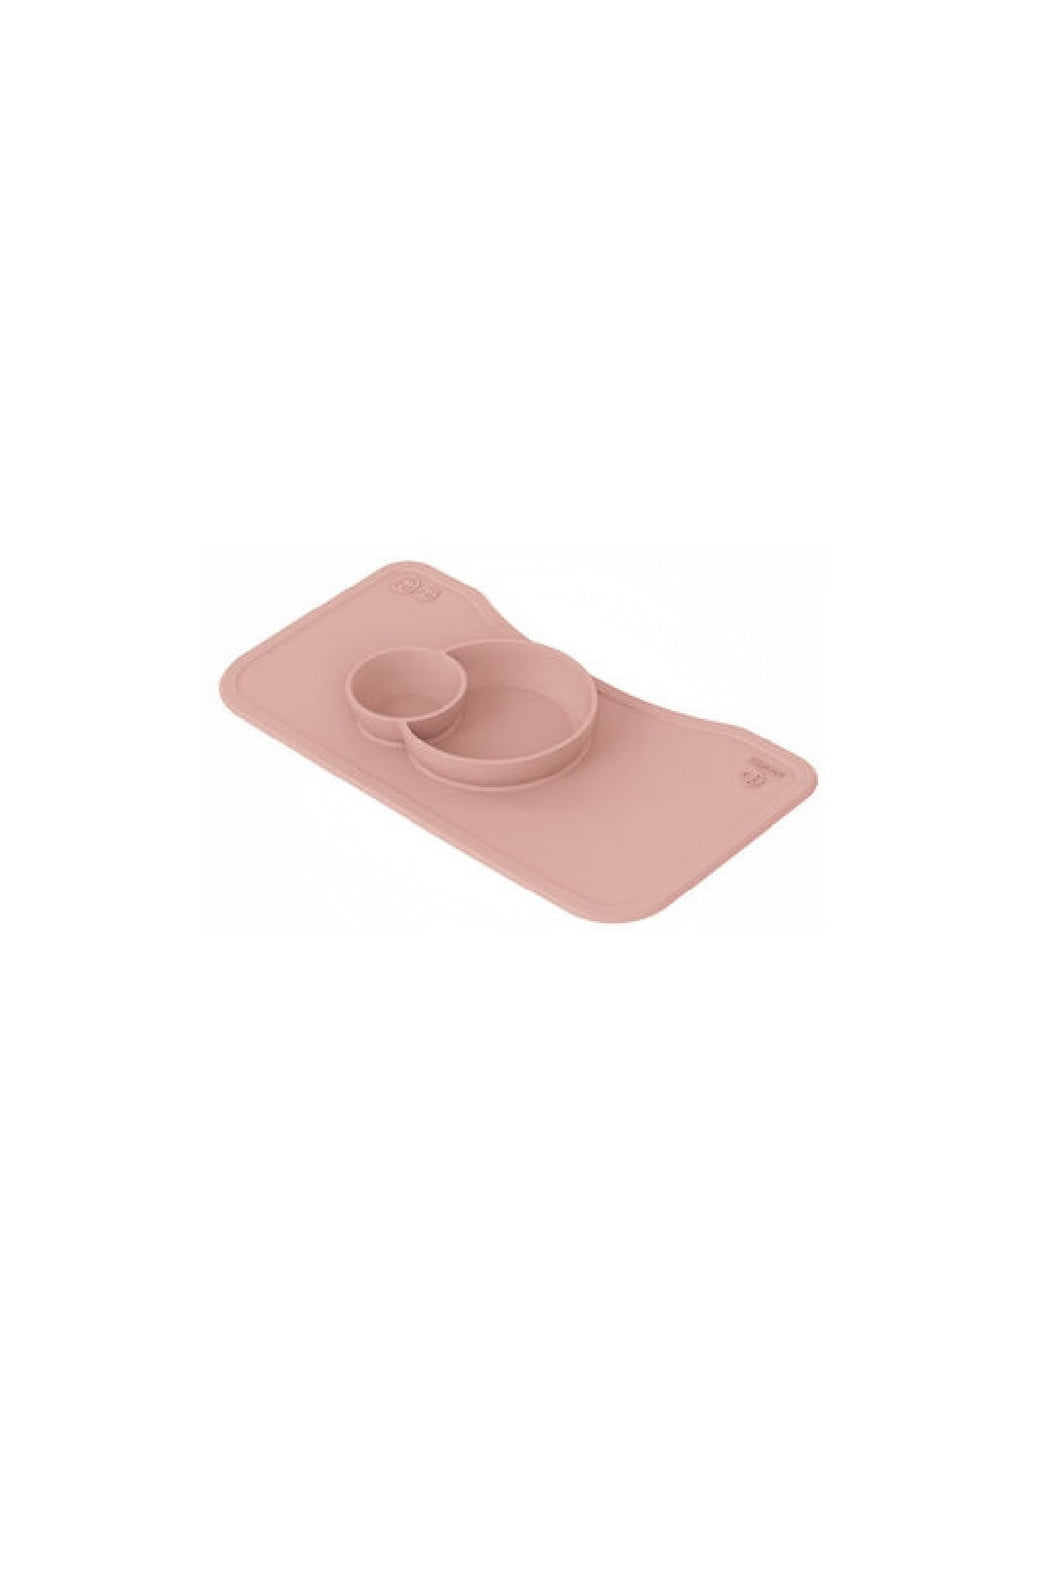 Ezpz By Stokke Placemat For Steps Tray Pink 2